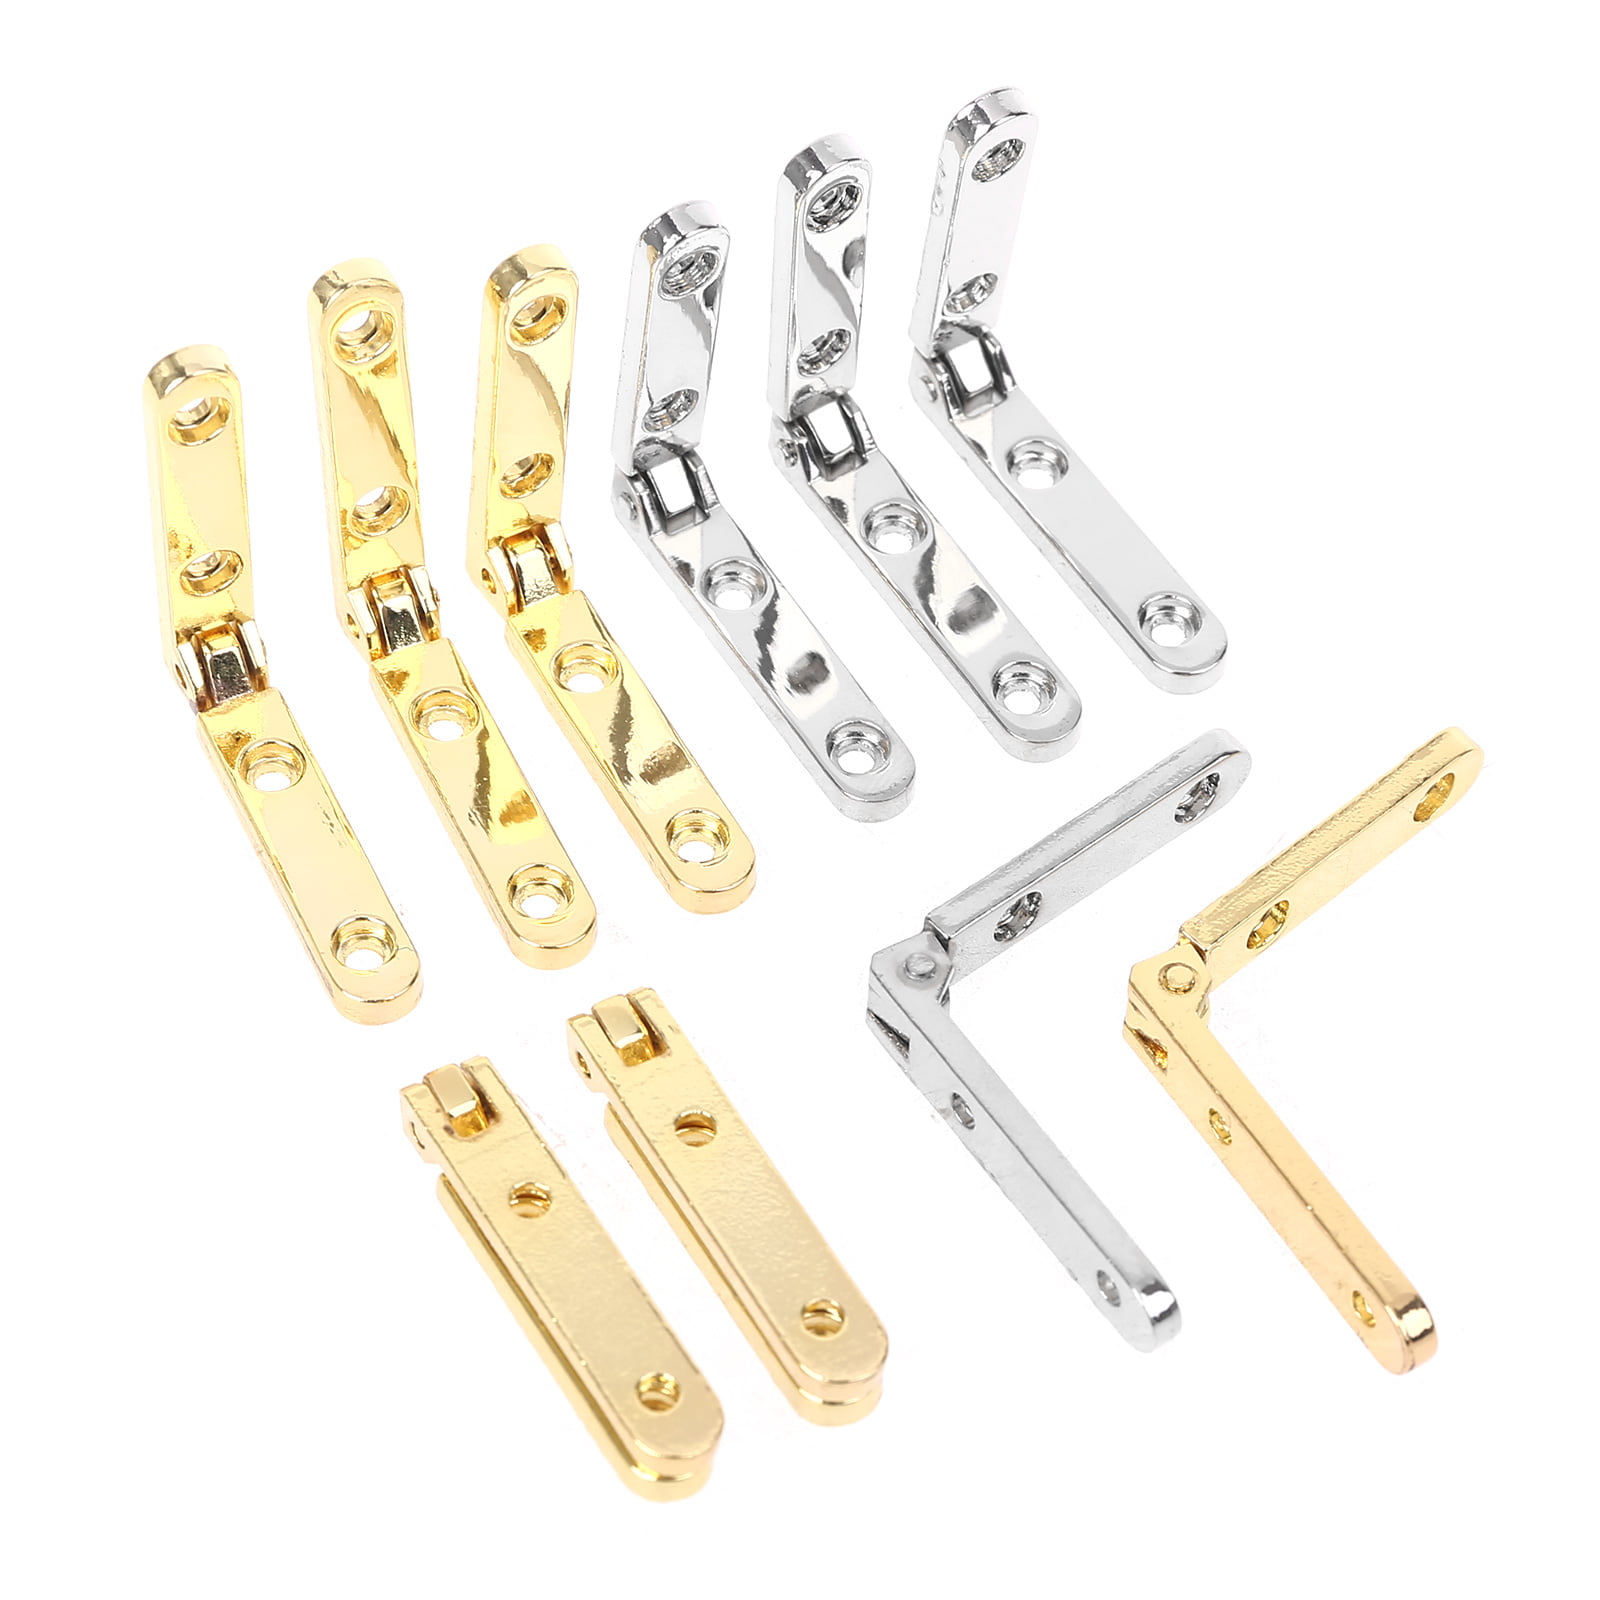 Details about   10Pcs/Bag 90° Hinges Zinc Alloy Spring Hinge for Wooden Box Jewellery Case New 